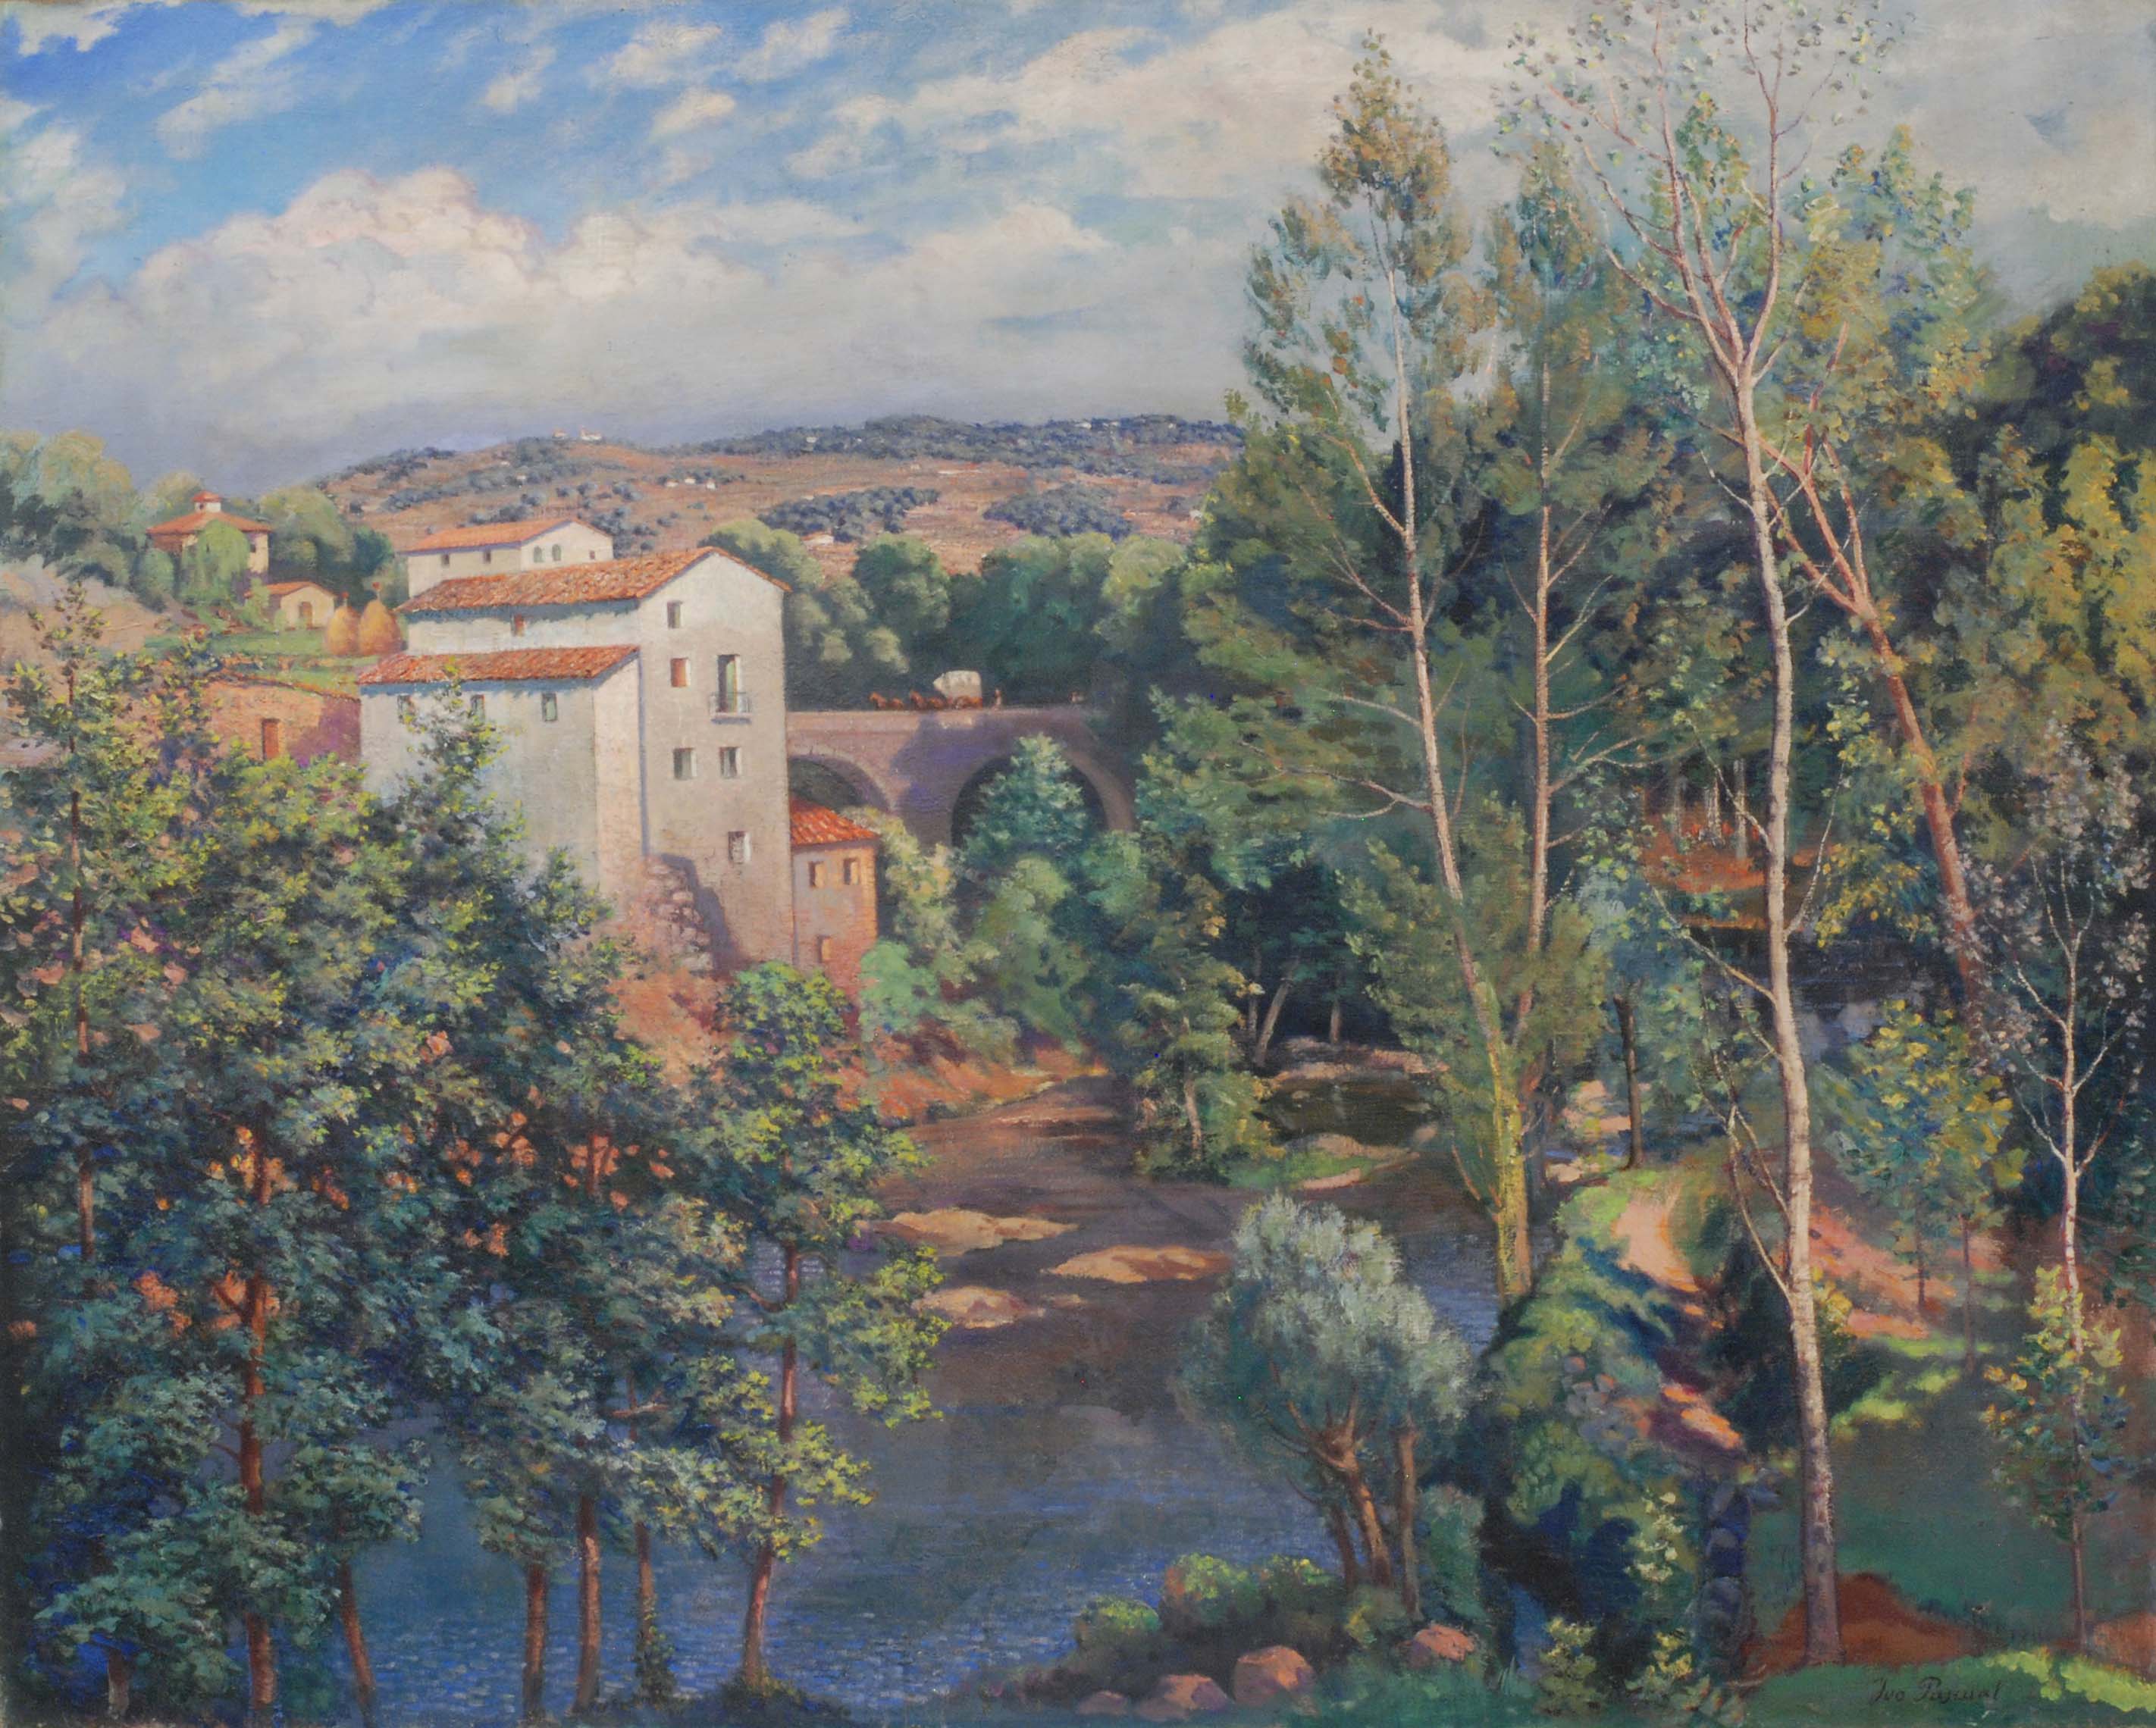 IVO PASCUAL RODES (1883-1949). "MILL AT SAINT ROCH", OLOT.